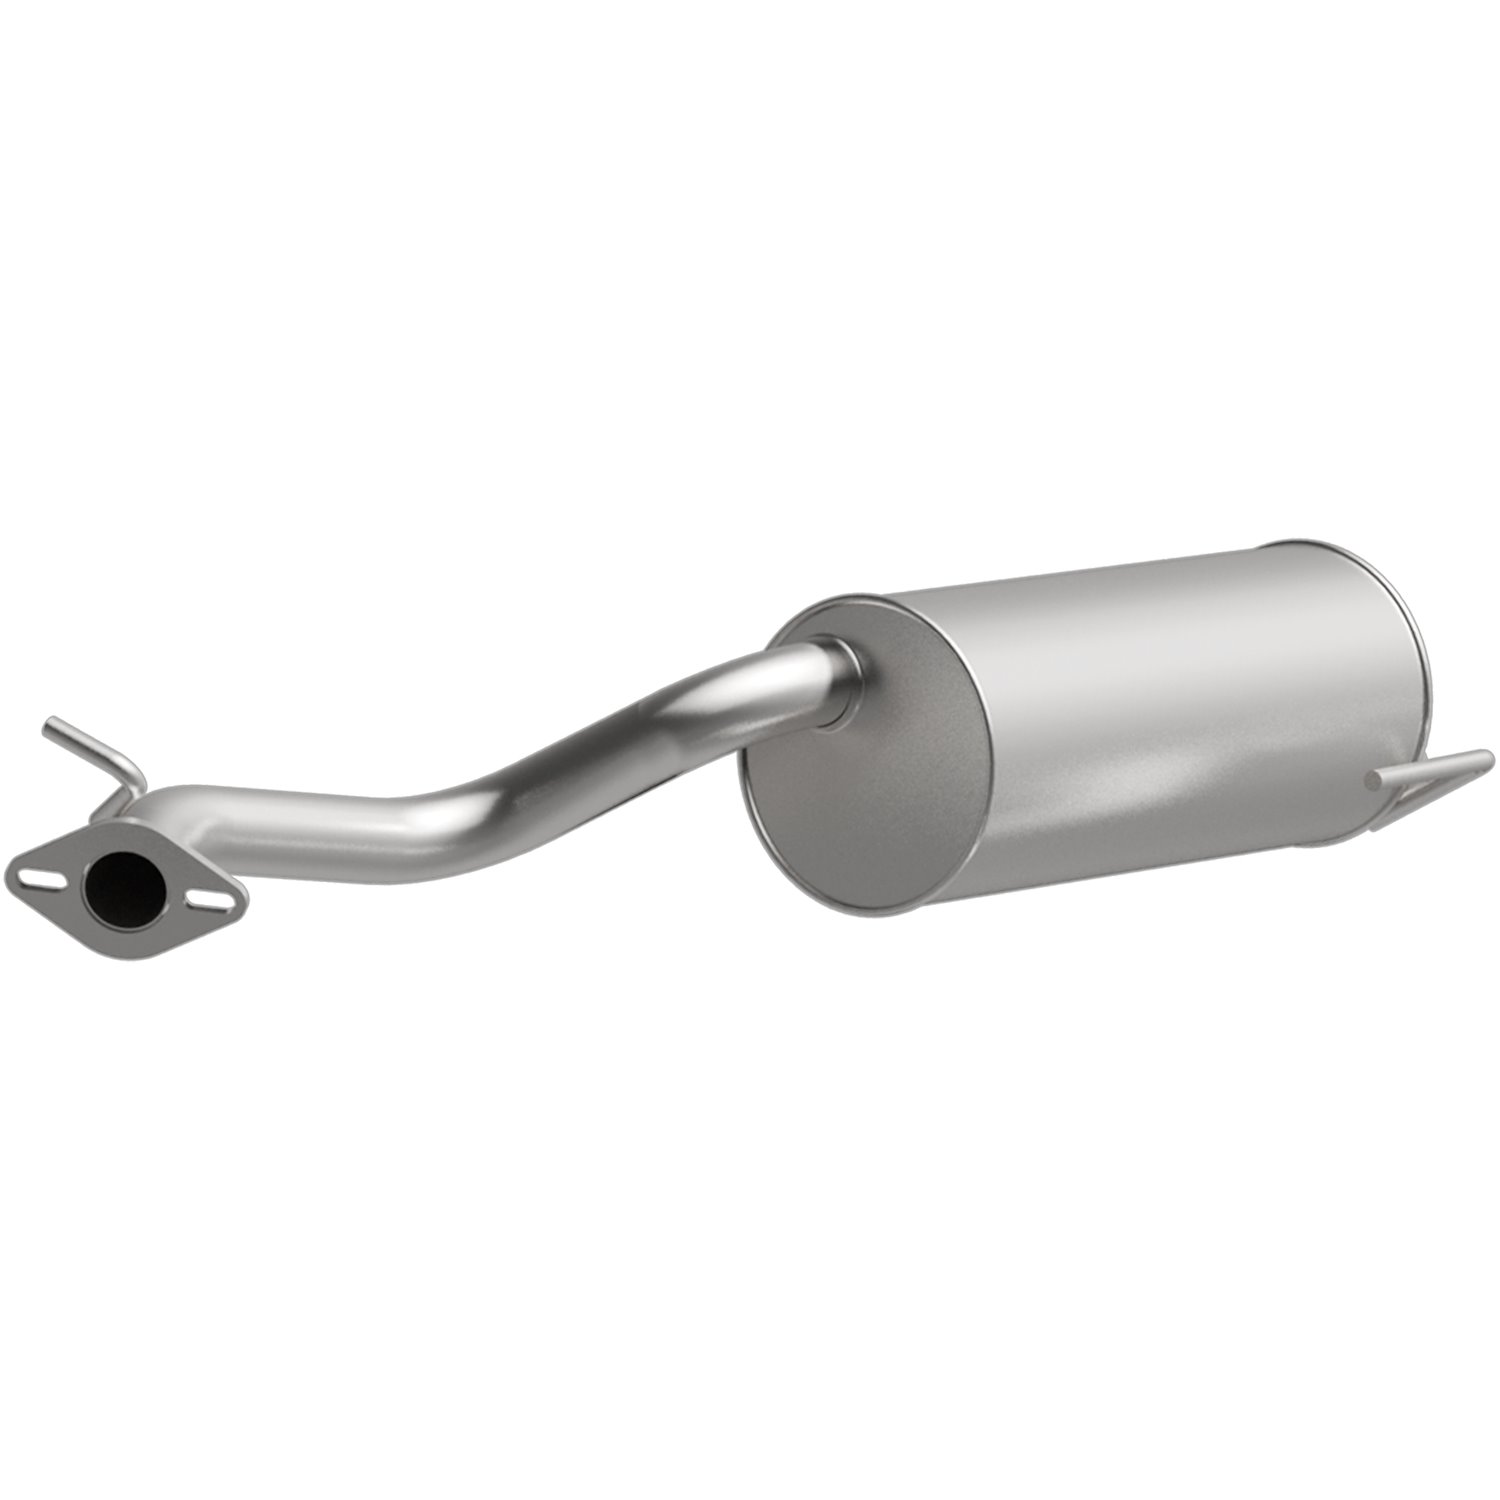 Direct-Fit Exhaust Muffler, 2000-2004 Subaru Legacy/Outback 2.5L